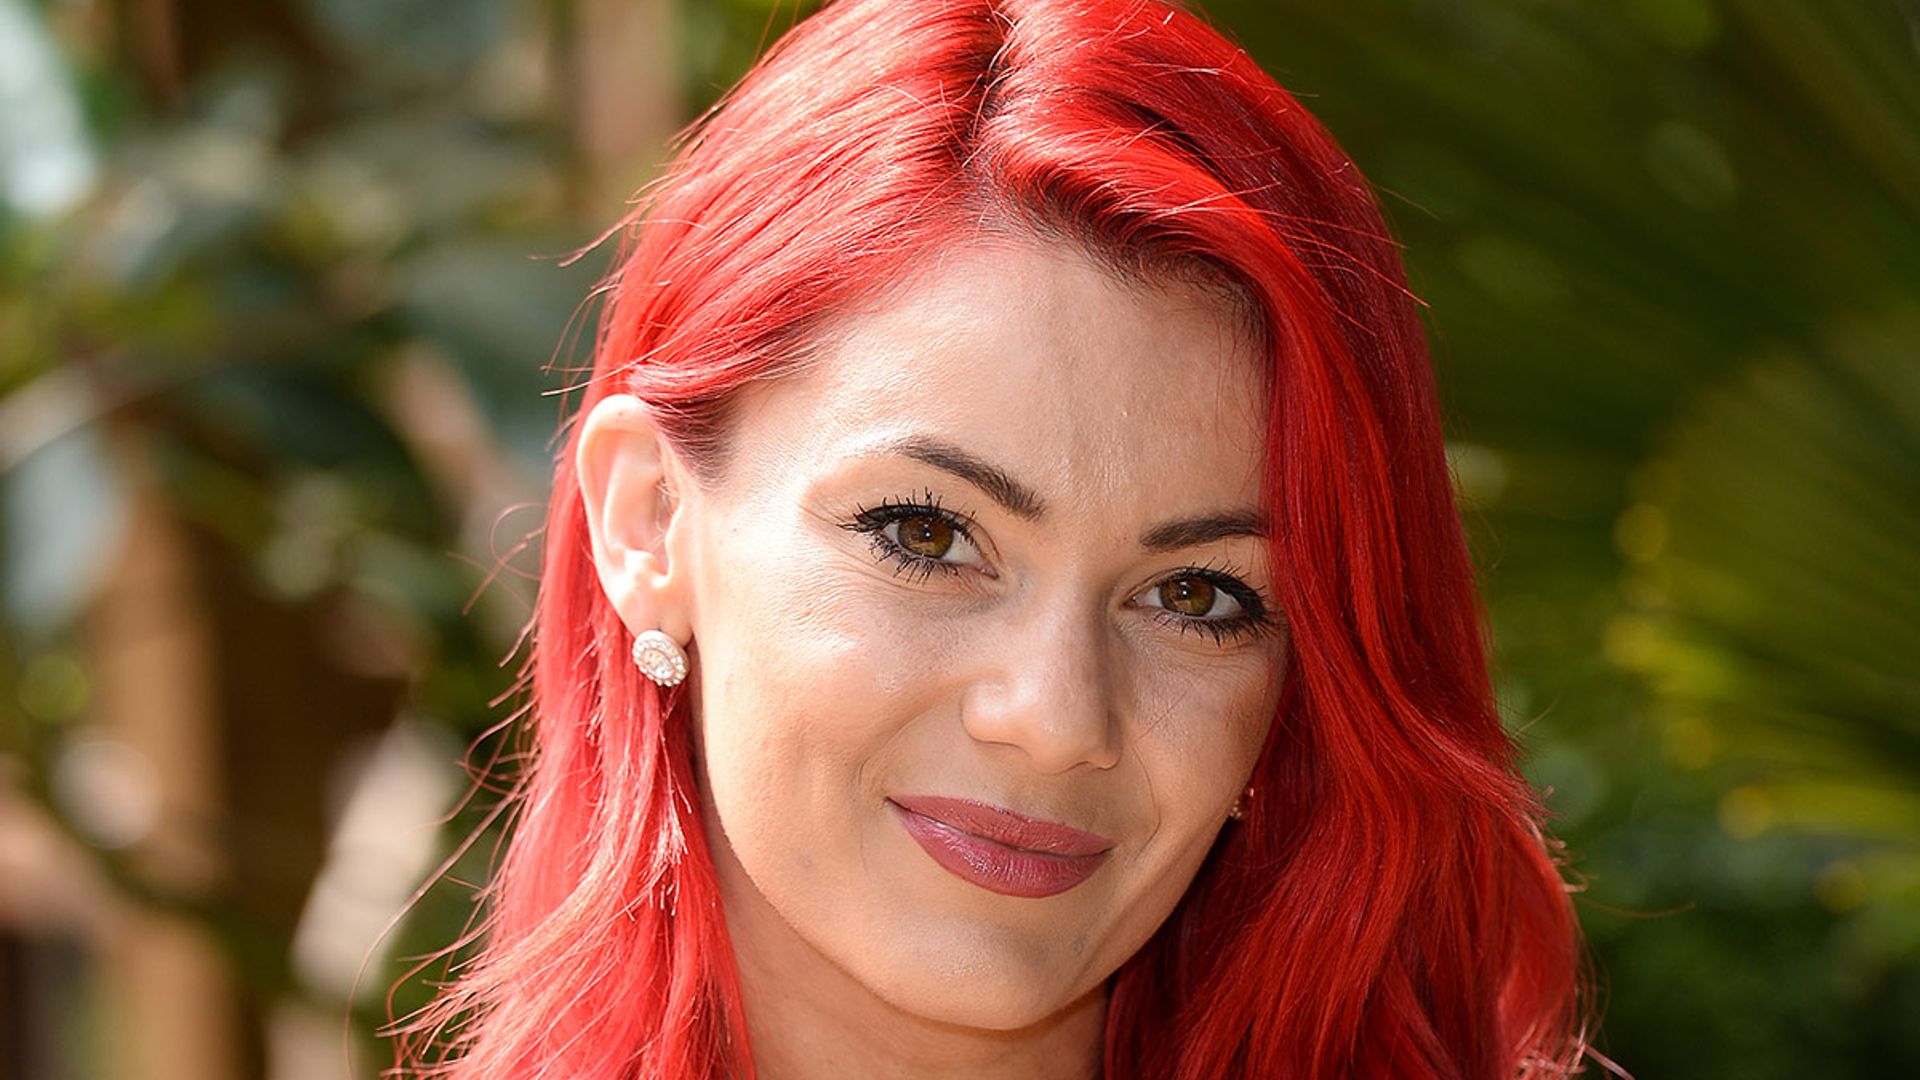 dianne-buswell-hair-transformation